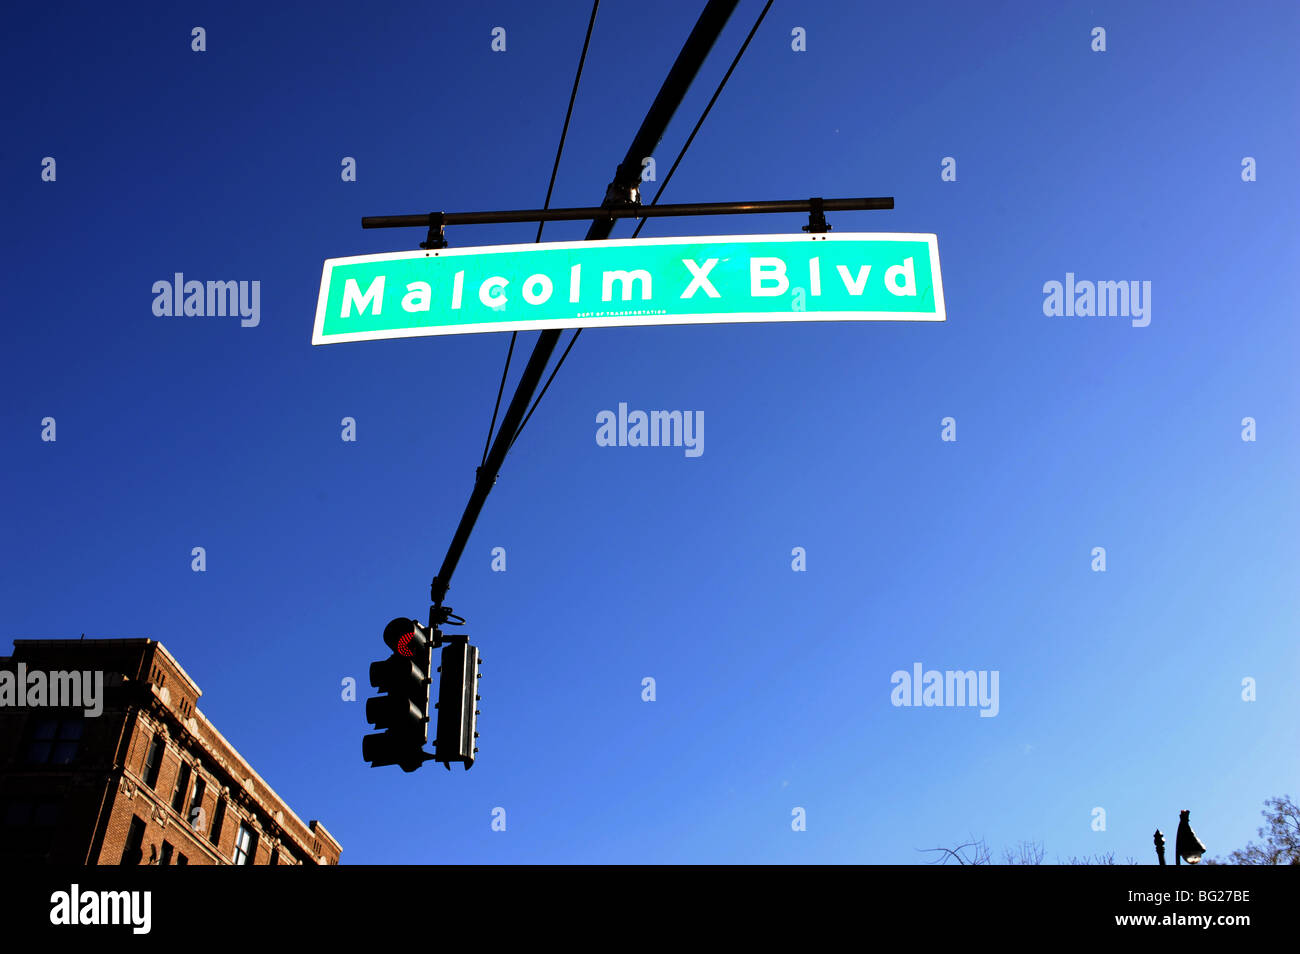 Malcolm X Blvd ( Boulevard ) sign above the street in Harlem New York USA - photo by Simon Dack Stock Photo